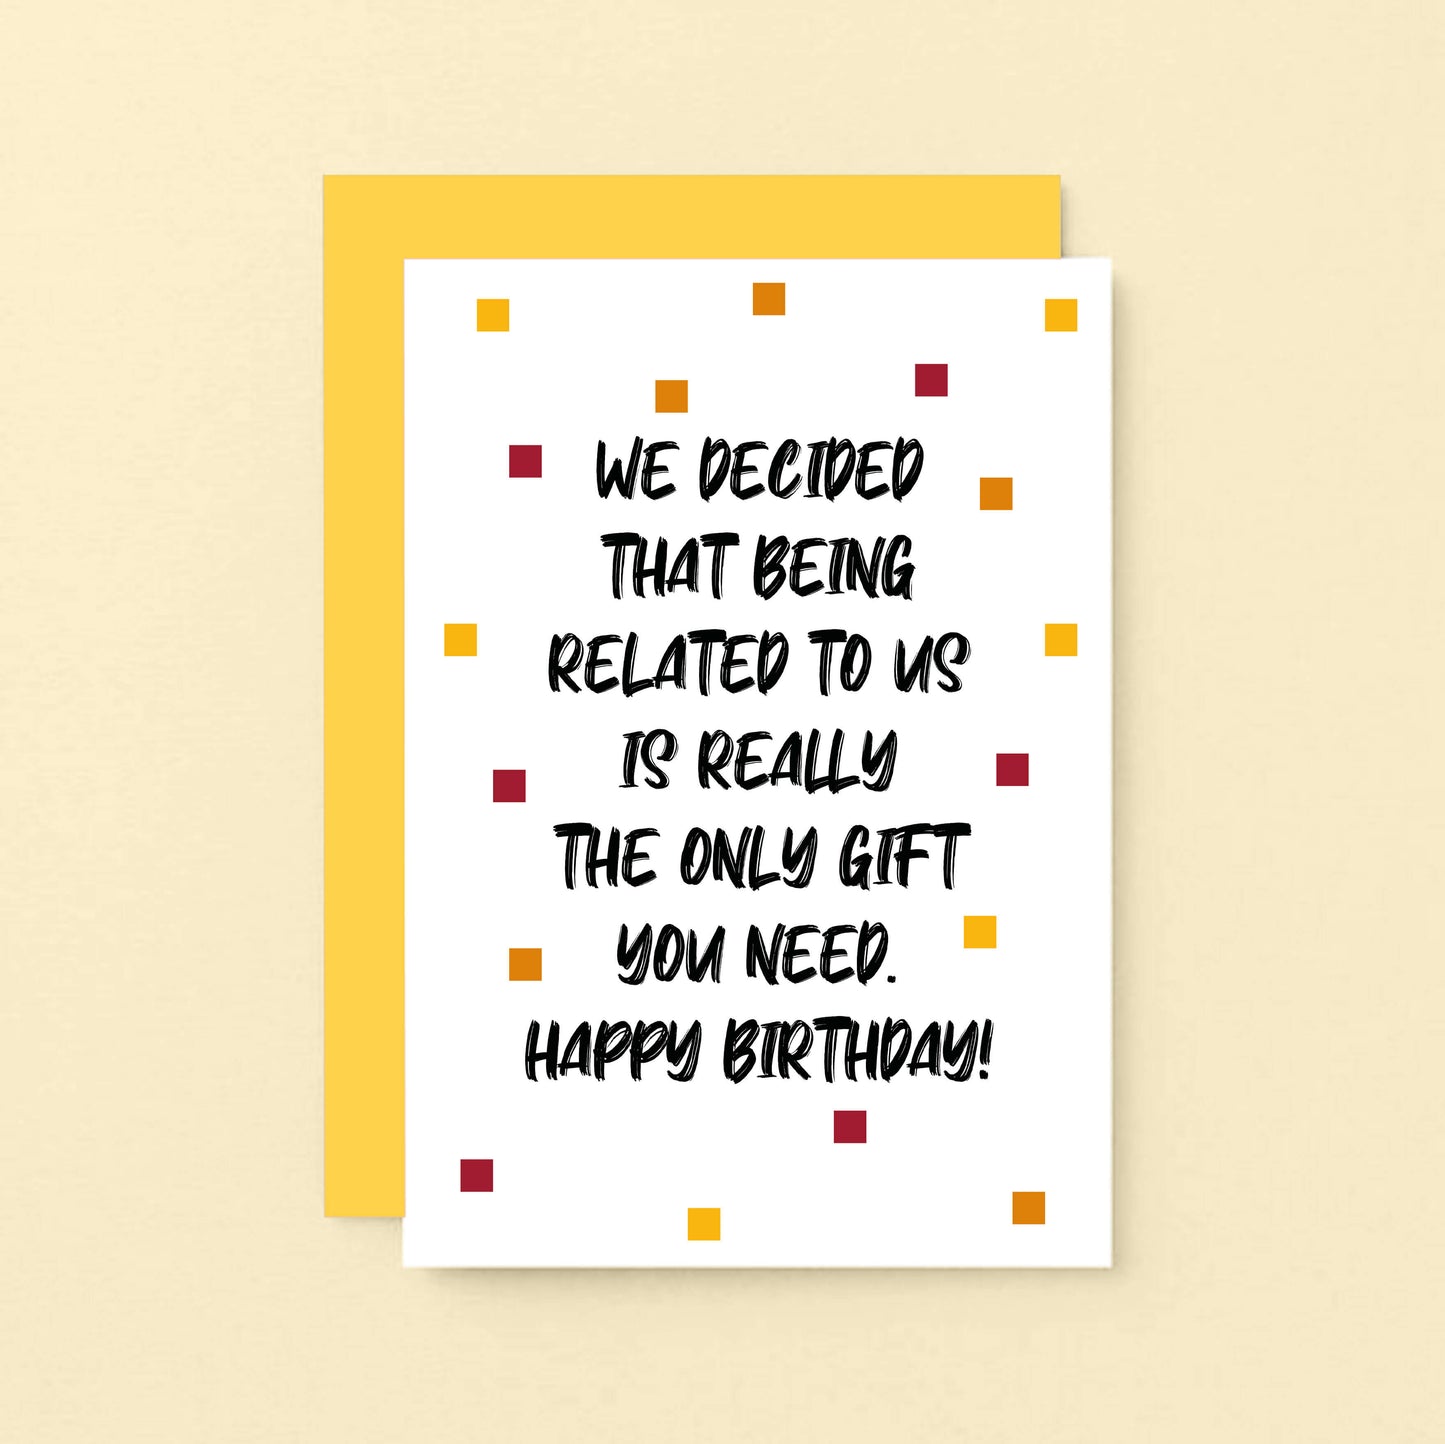 Birthday Card by SixElevenCreations. Reads We decided that being related to us is really the only gift you need. Happy birthday! Product Code SE1404A6